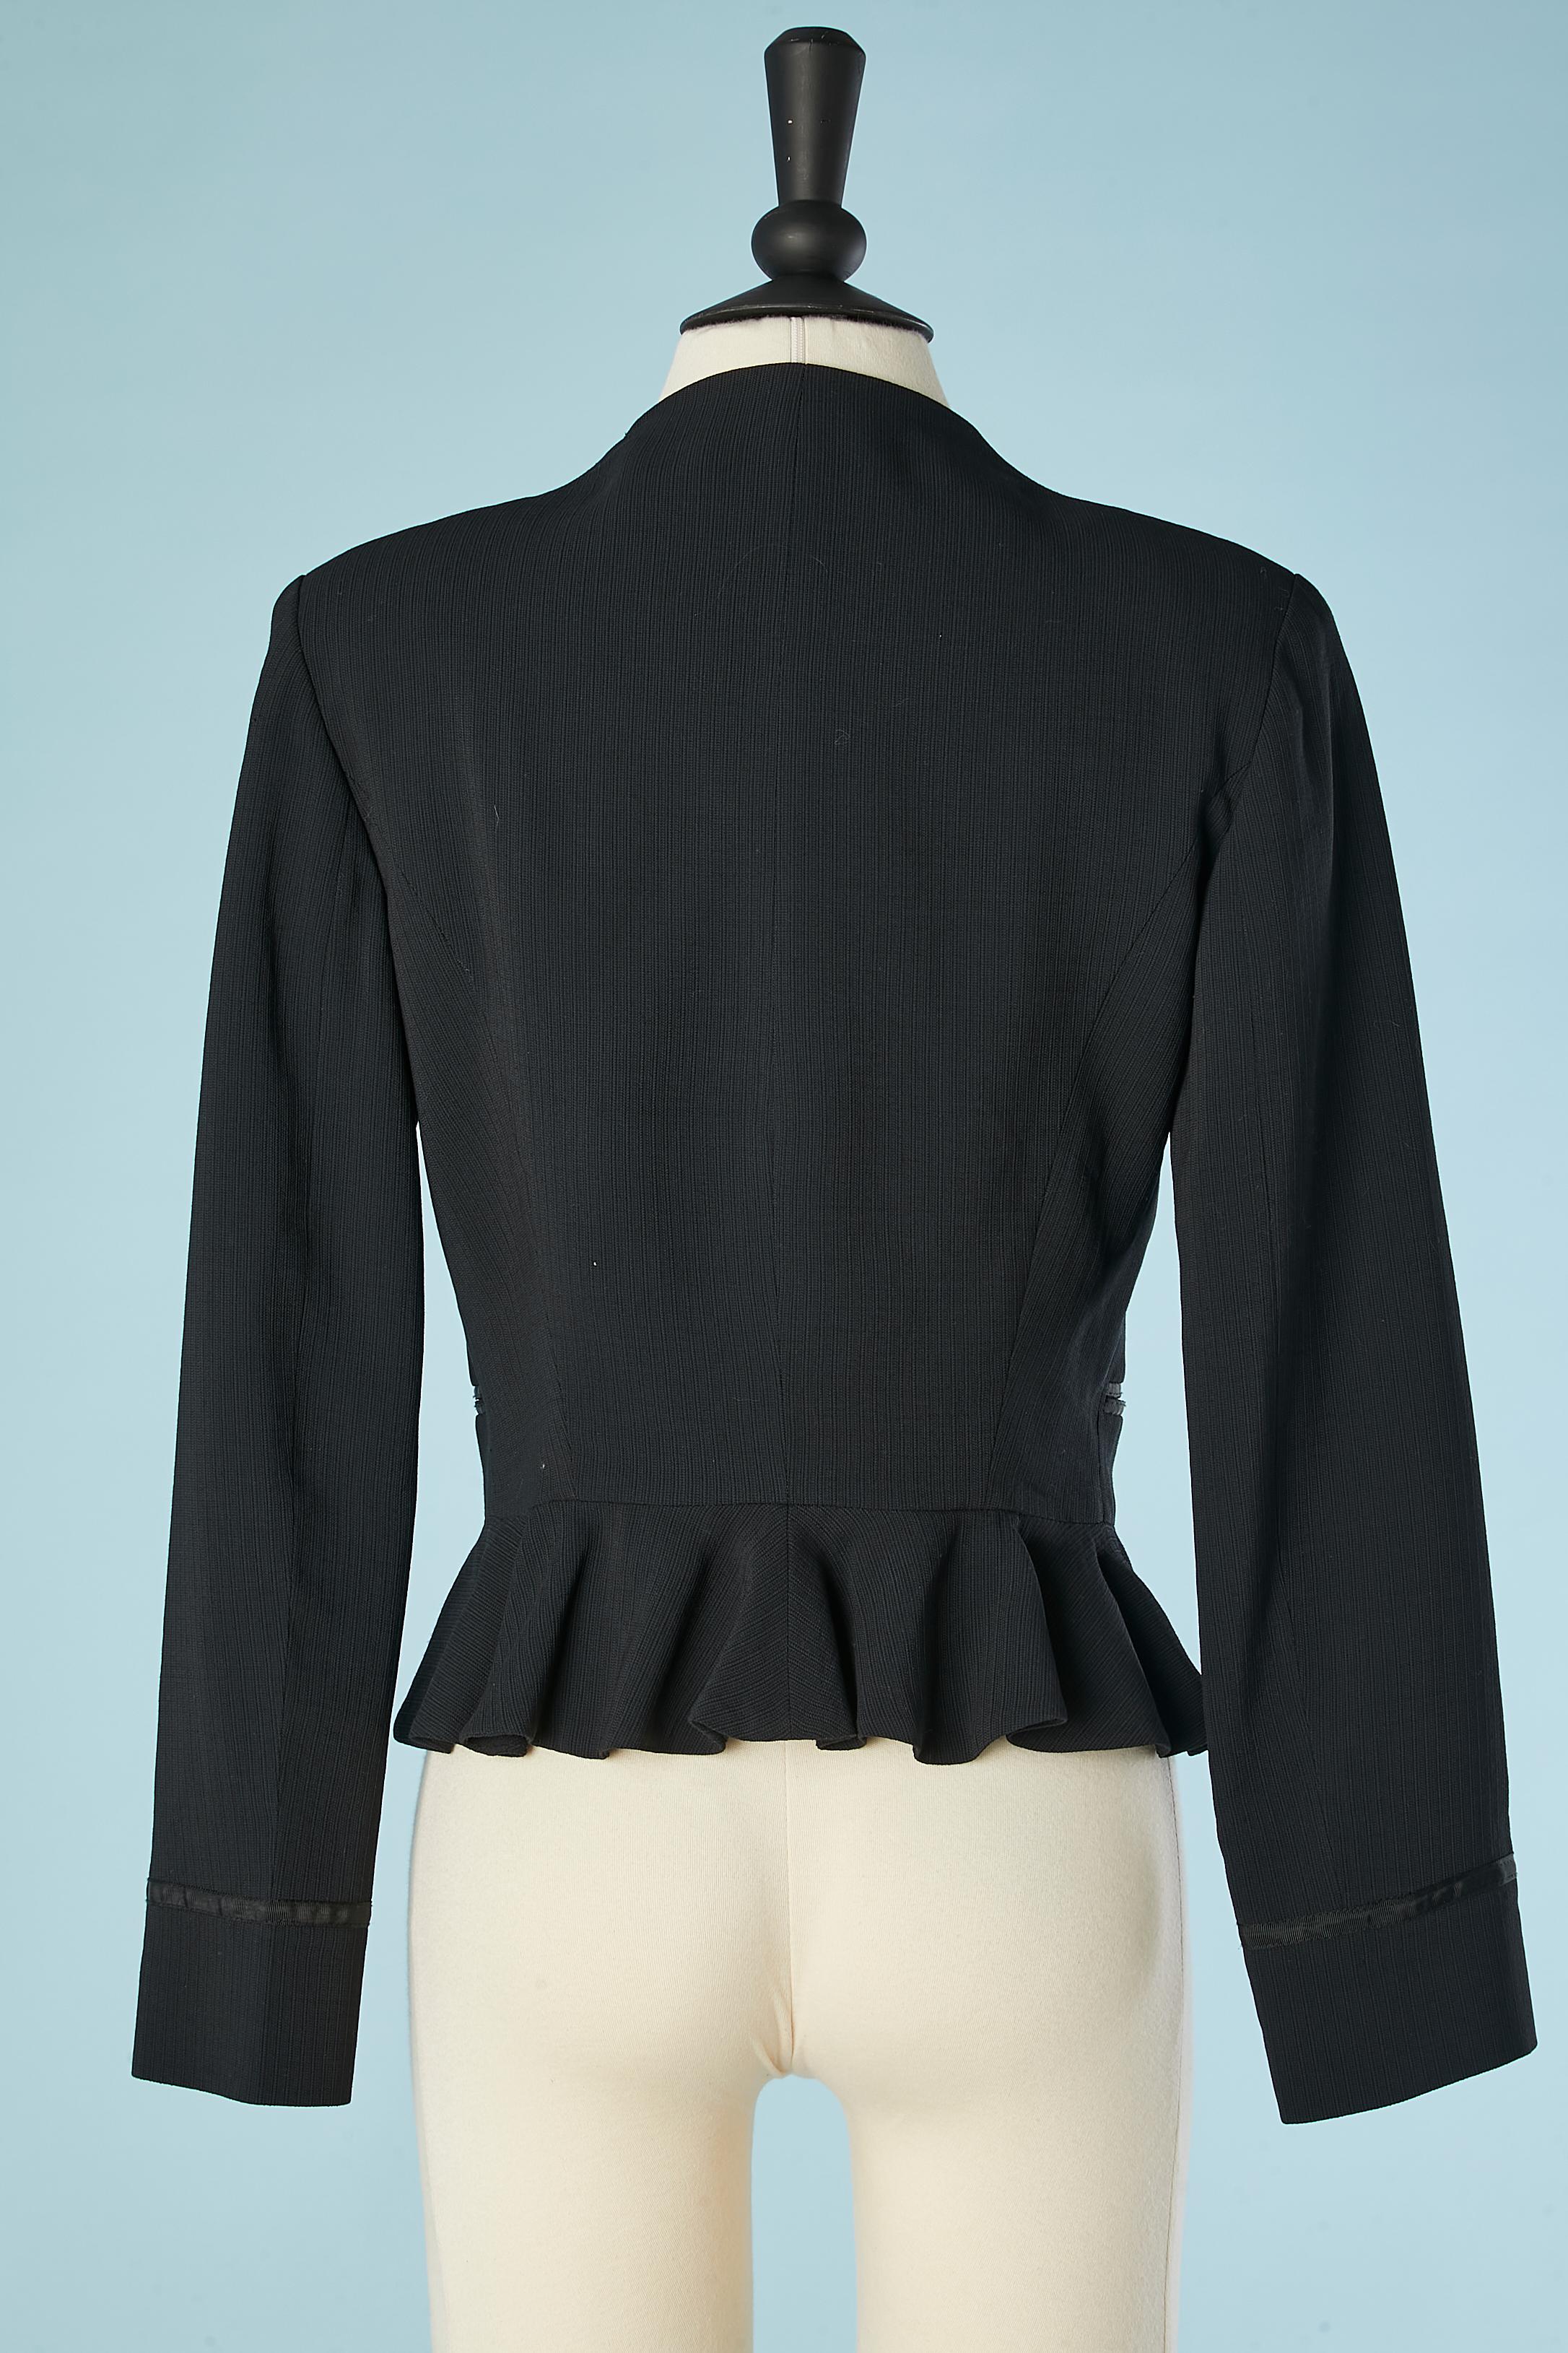 Women's Sigle breasted black jacket Christian Lacroix  For Sale